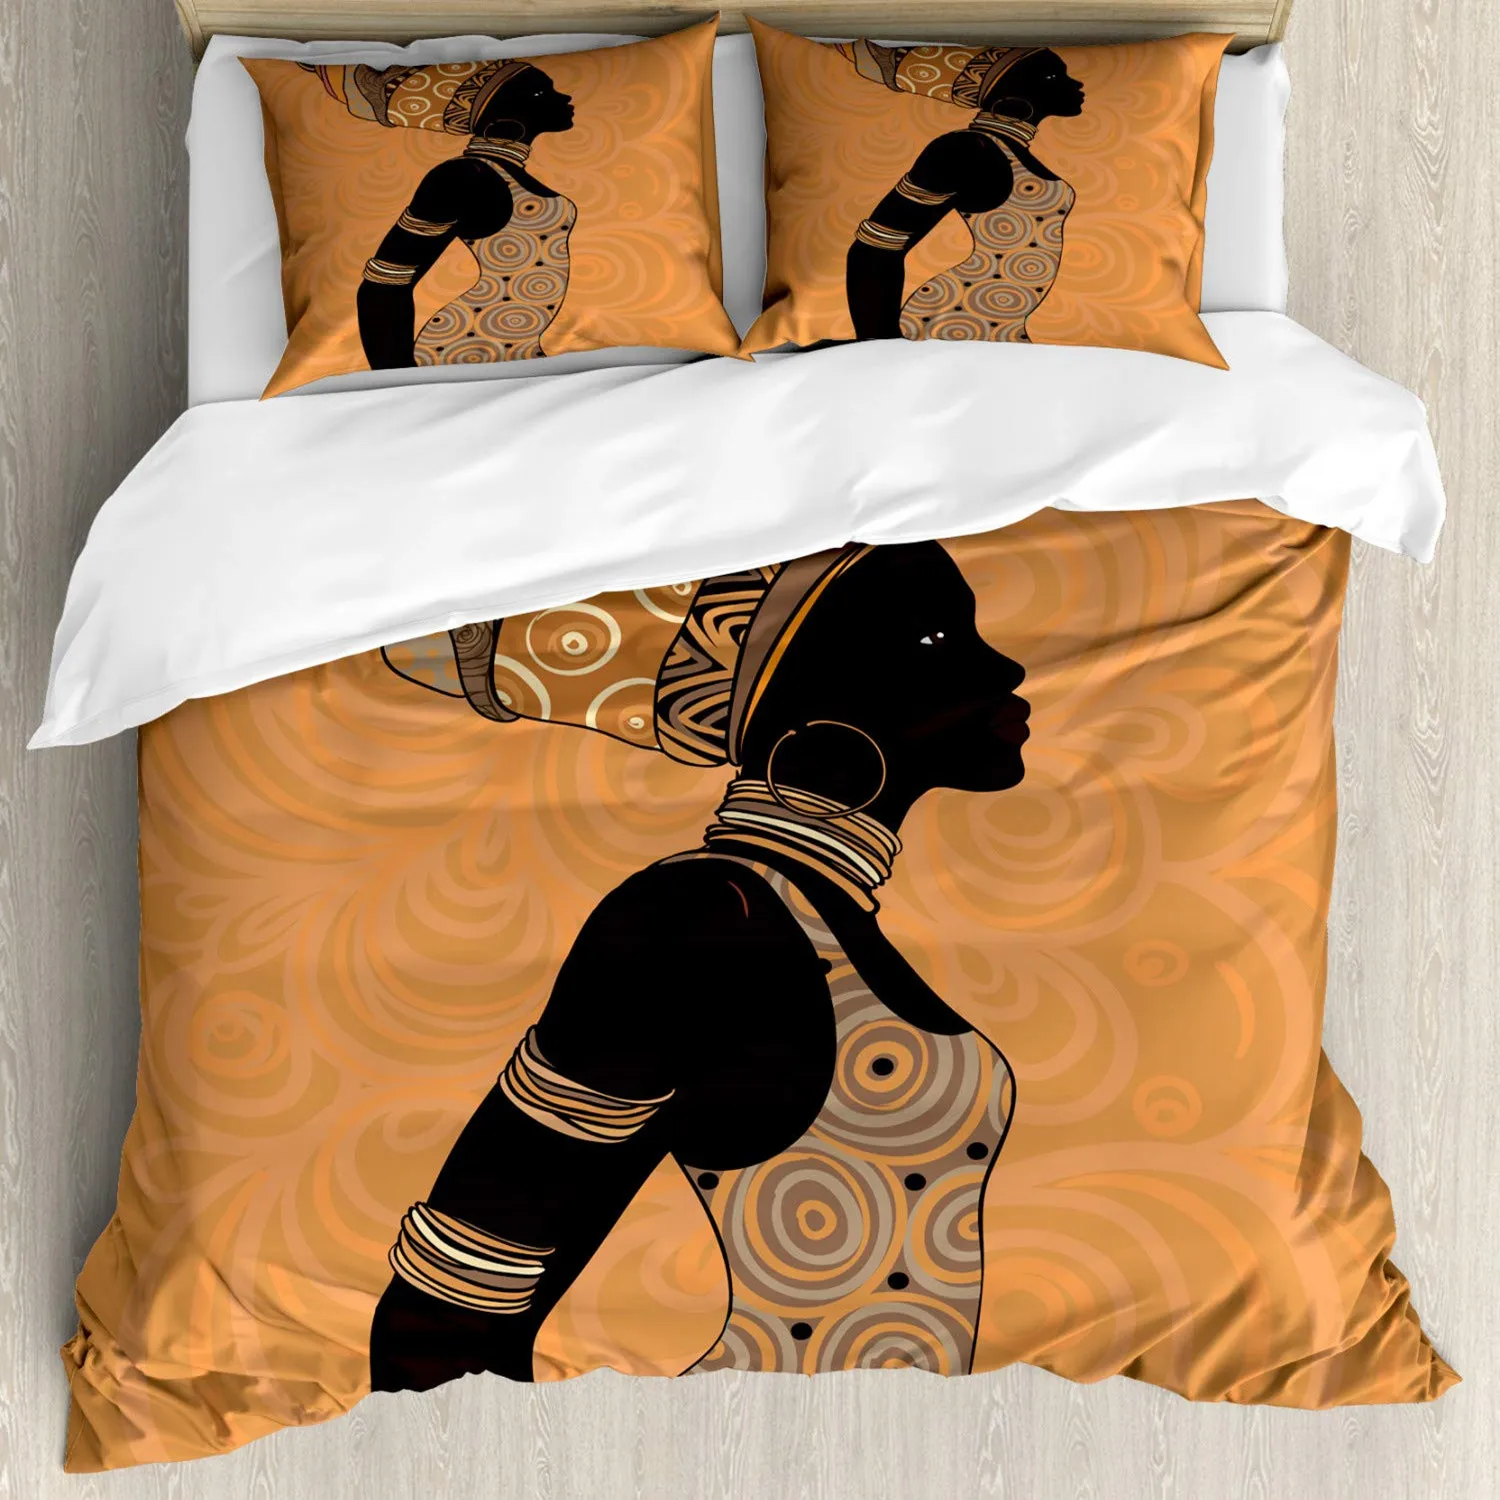 

African Duvet Cover Creative Woman In Desert with Gulls Folk Female Print Double Queen King Polyester Qulit Cover Flying Around